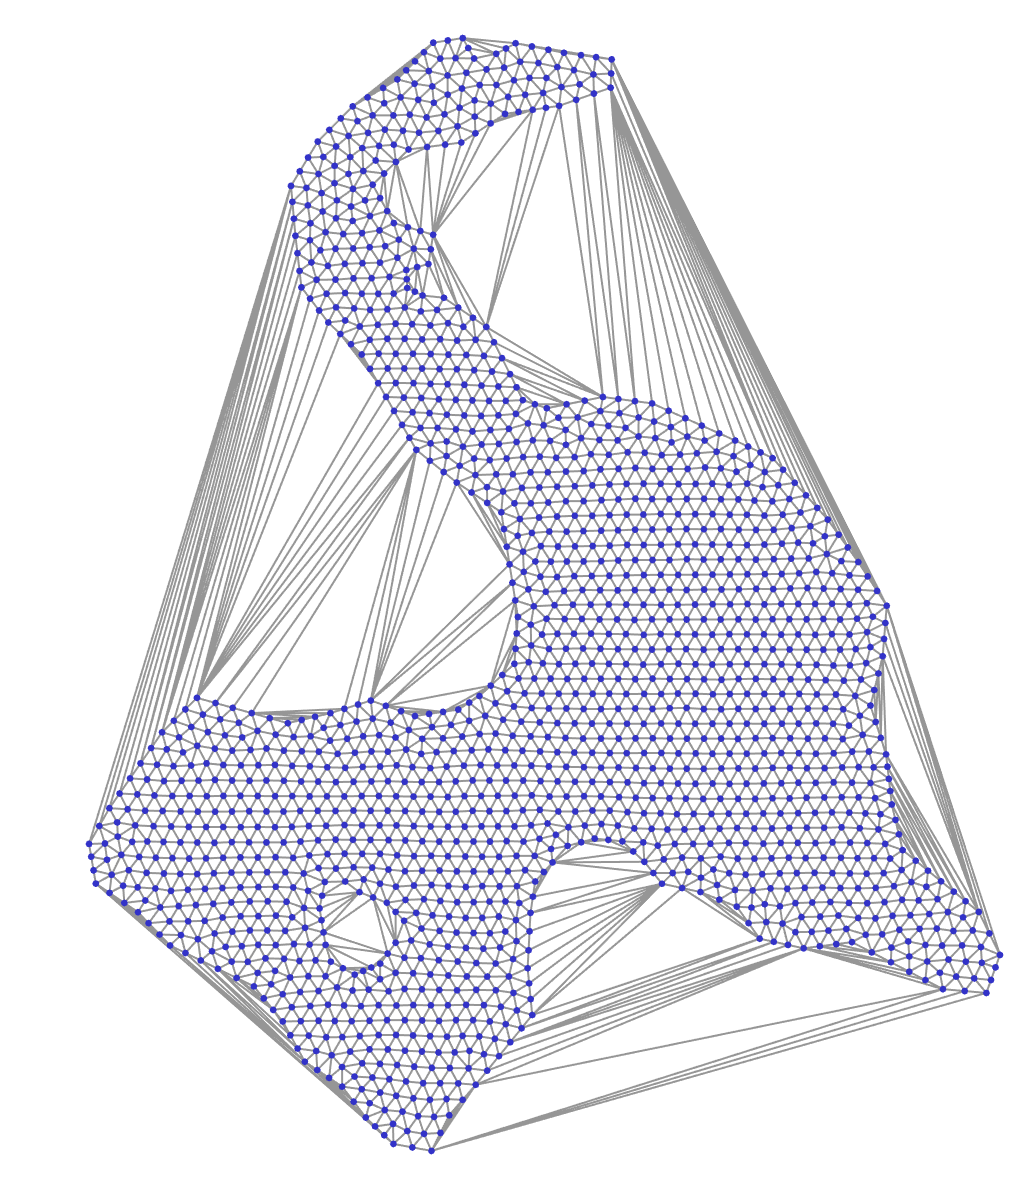 Example of a triangulated convex hull